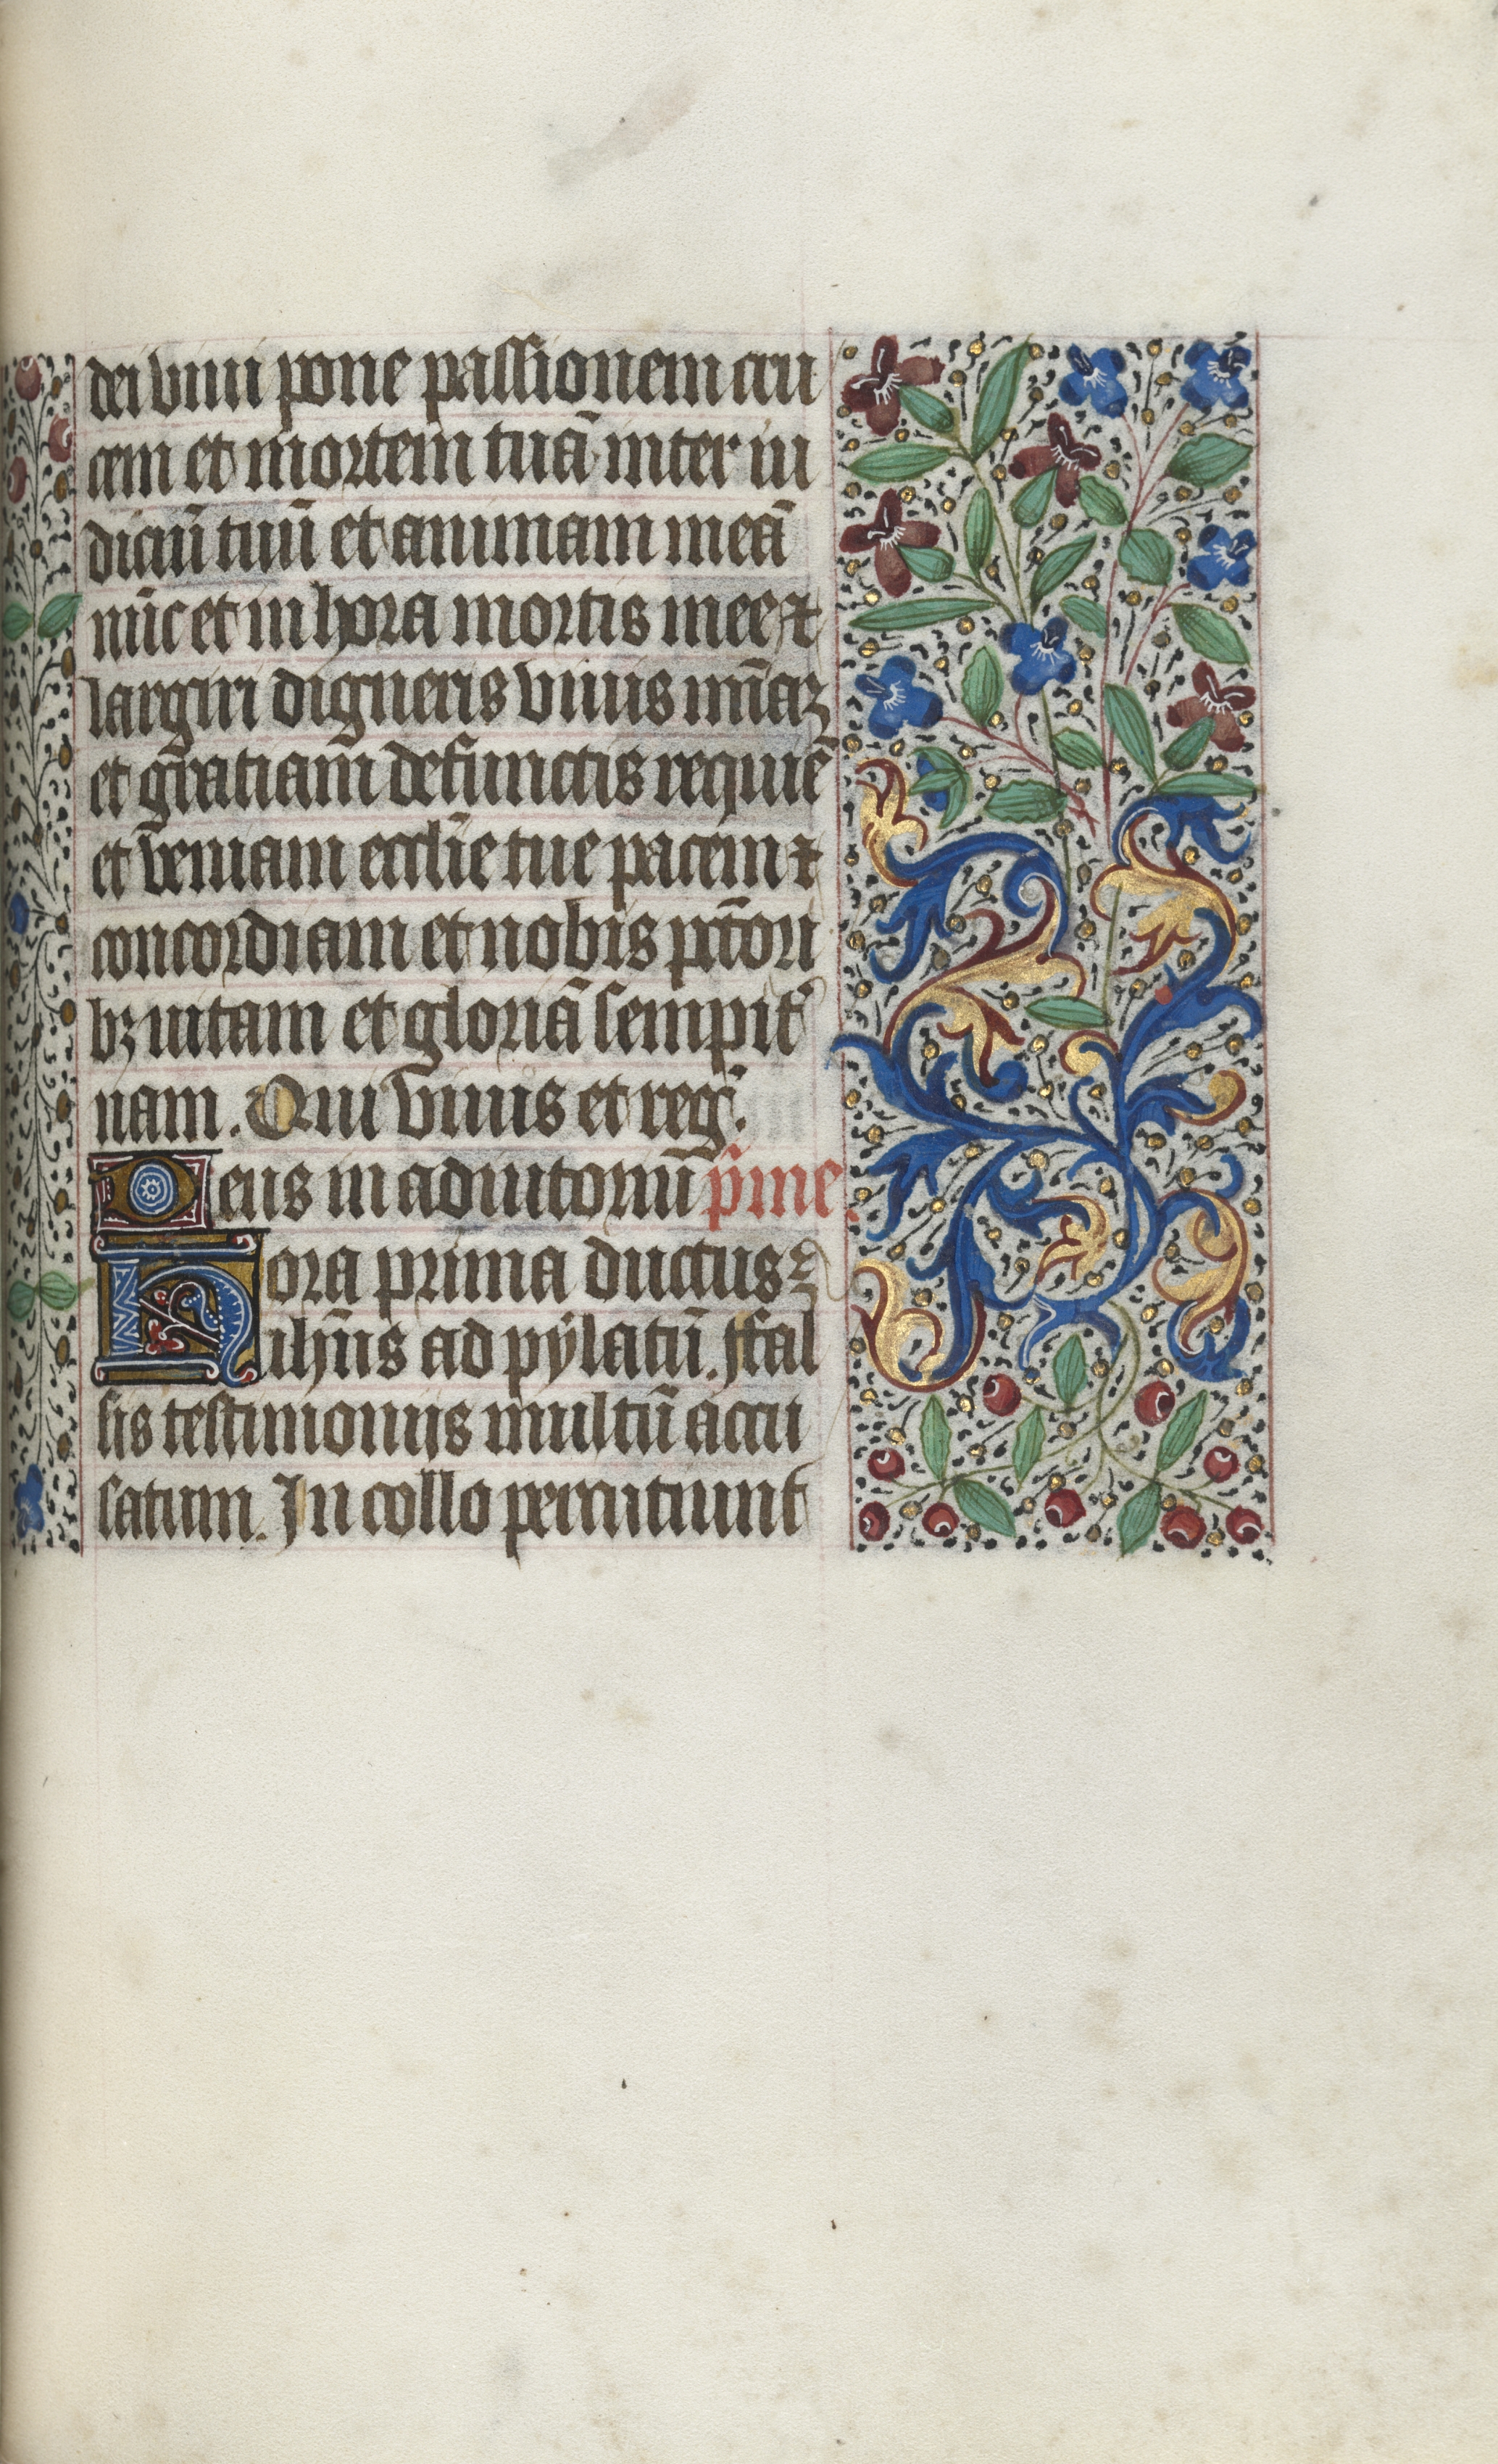 Book of Hours (Use of Rouen): fol. 97r